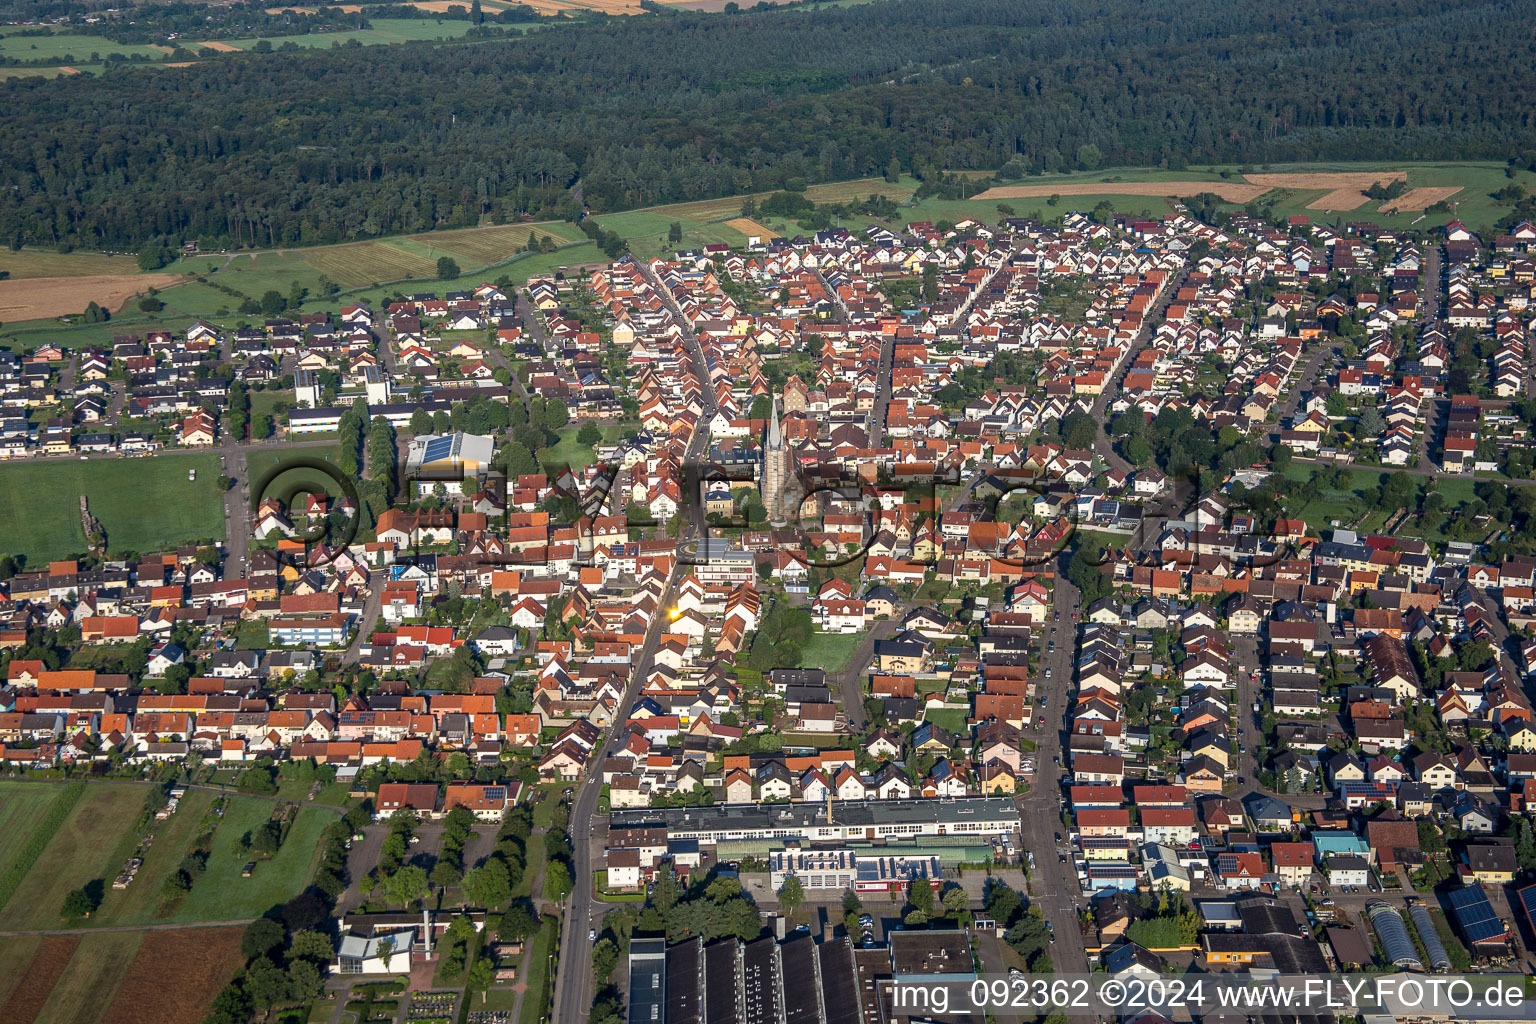 Town View of the streets and houses of the residential areas in Hambruecken in the state Baden-Wurttemberg, Germany